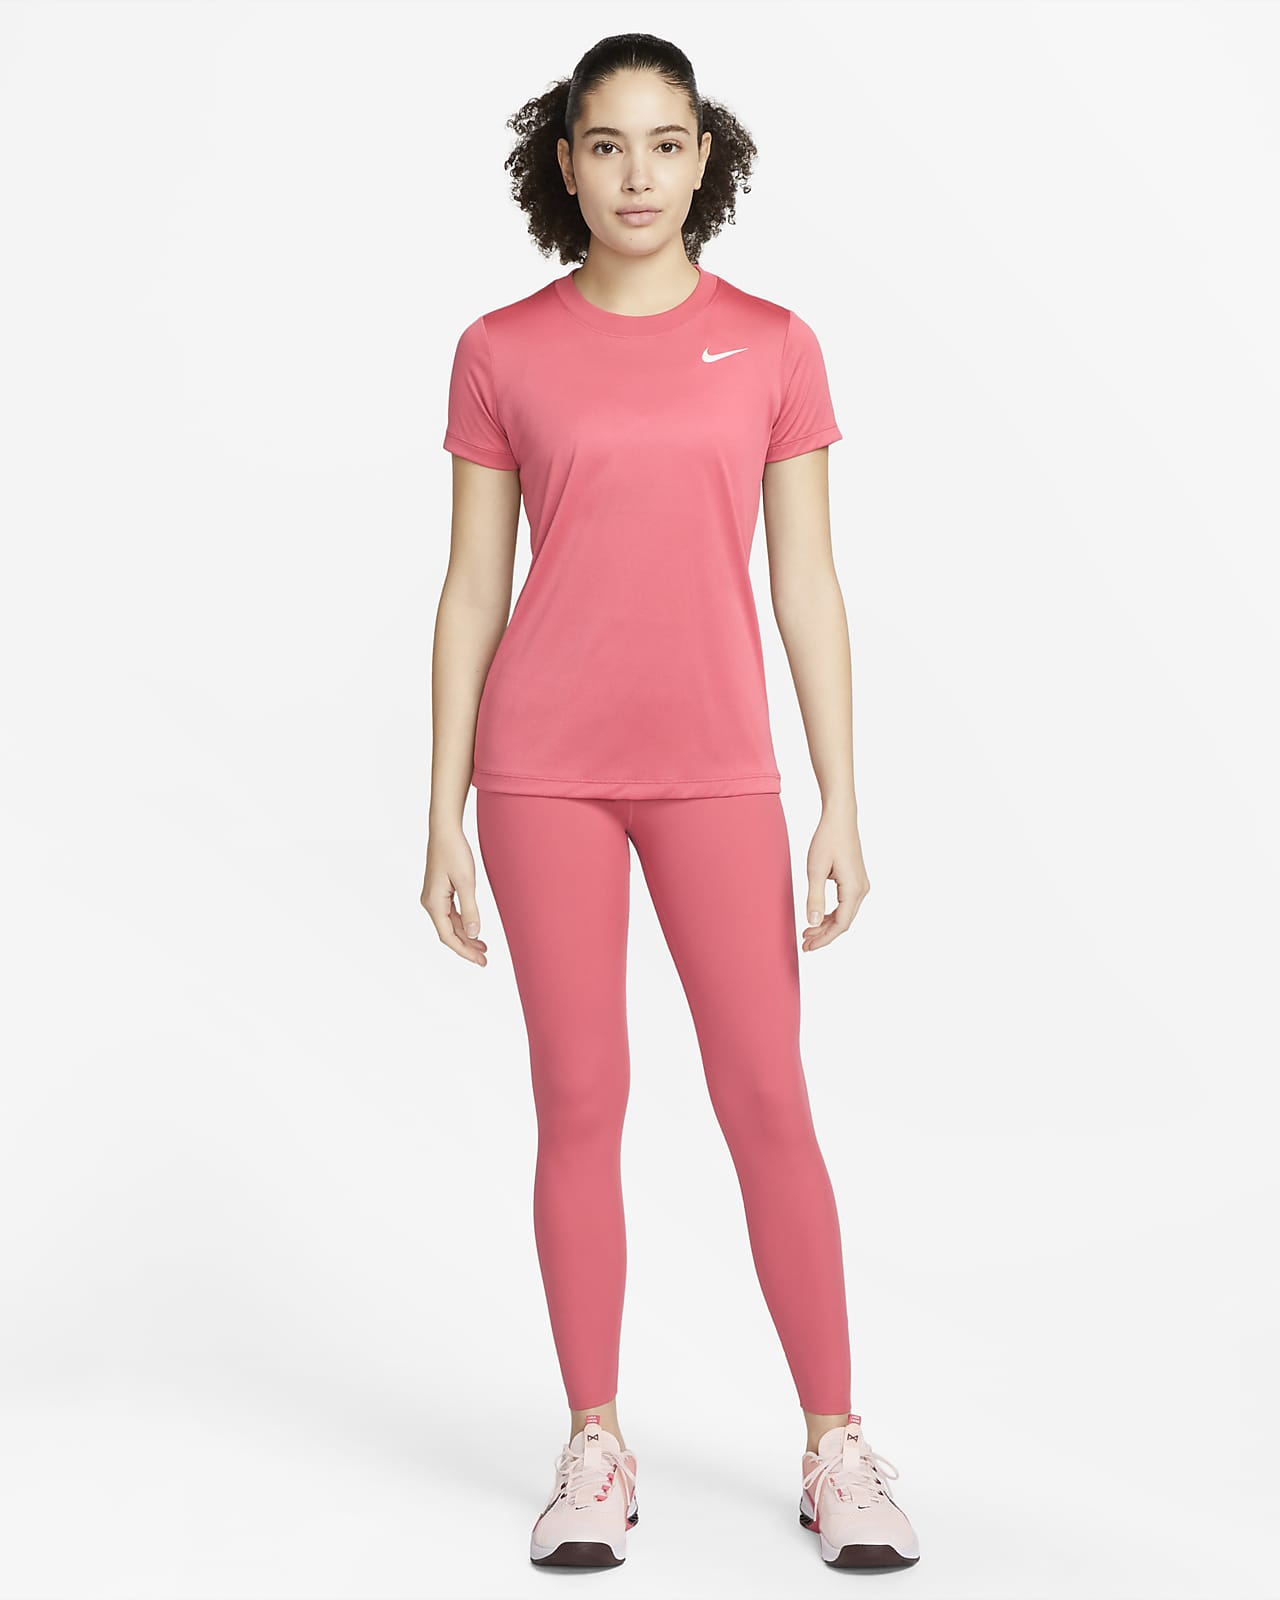 PINK ultimate leggings - size XS - clothing & accessories - by